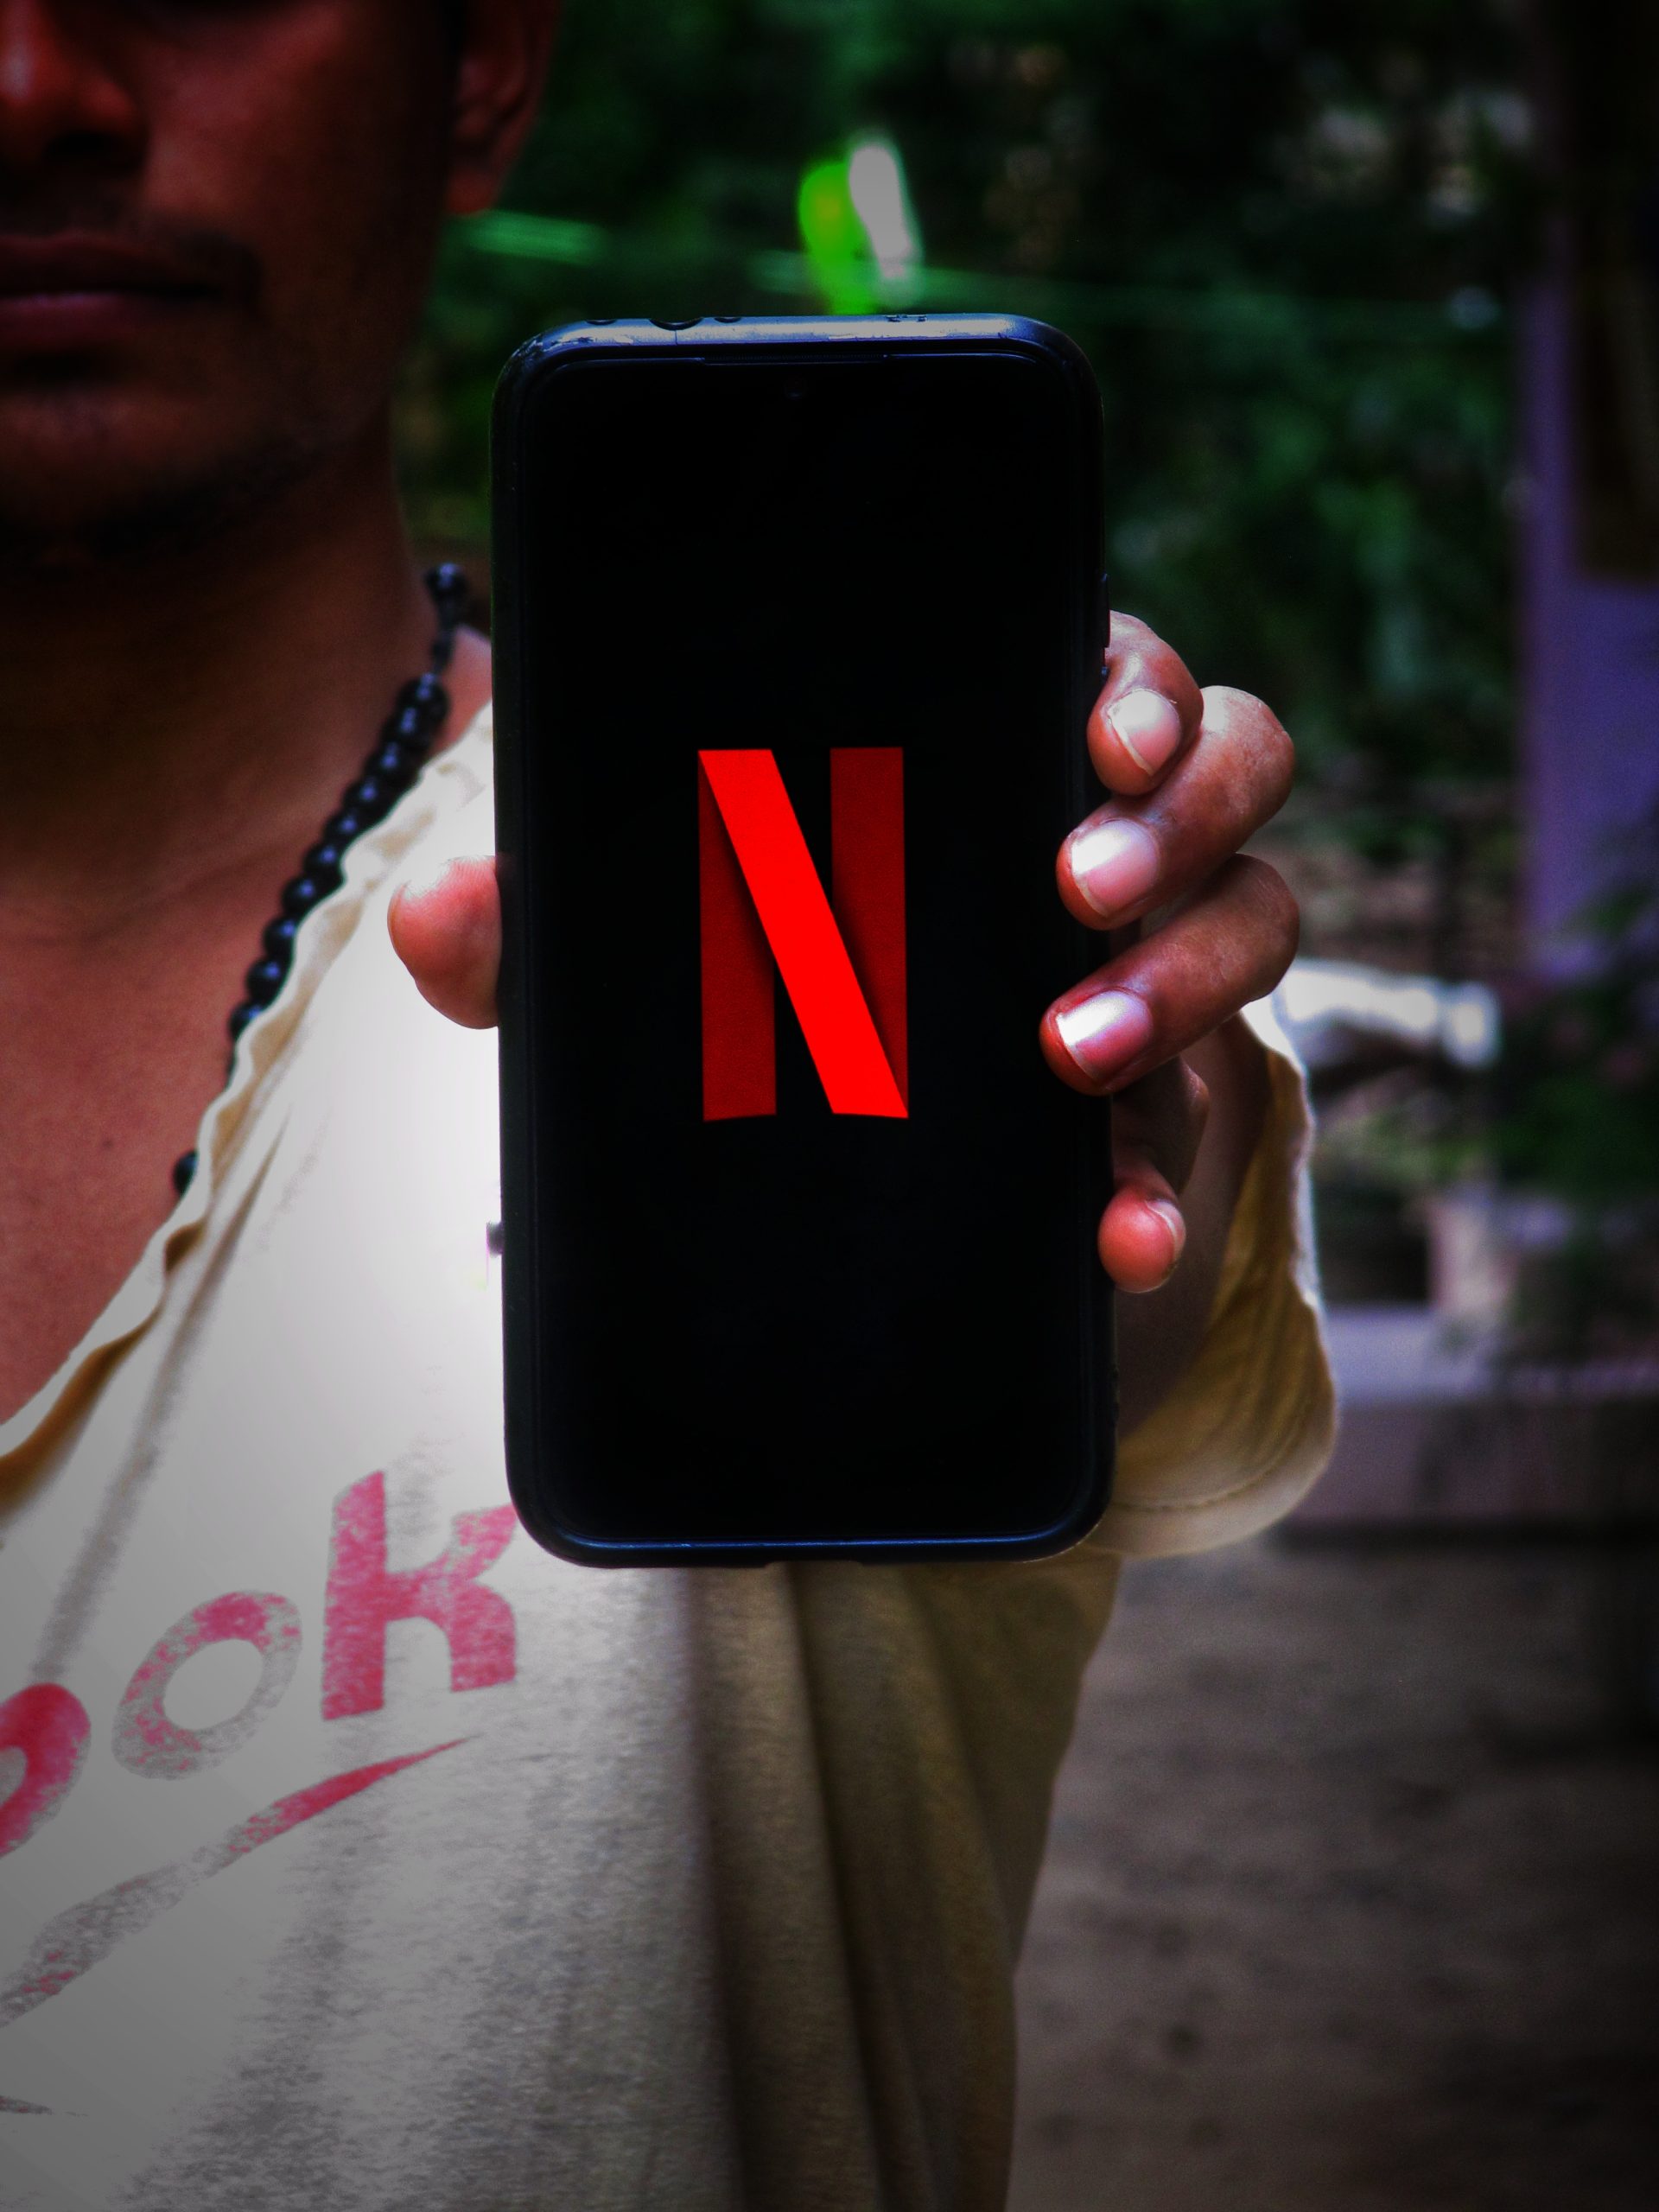 Netflix in mobile